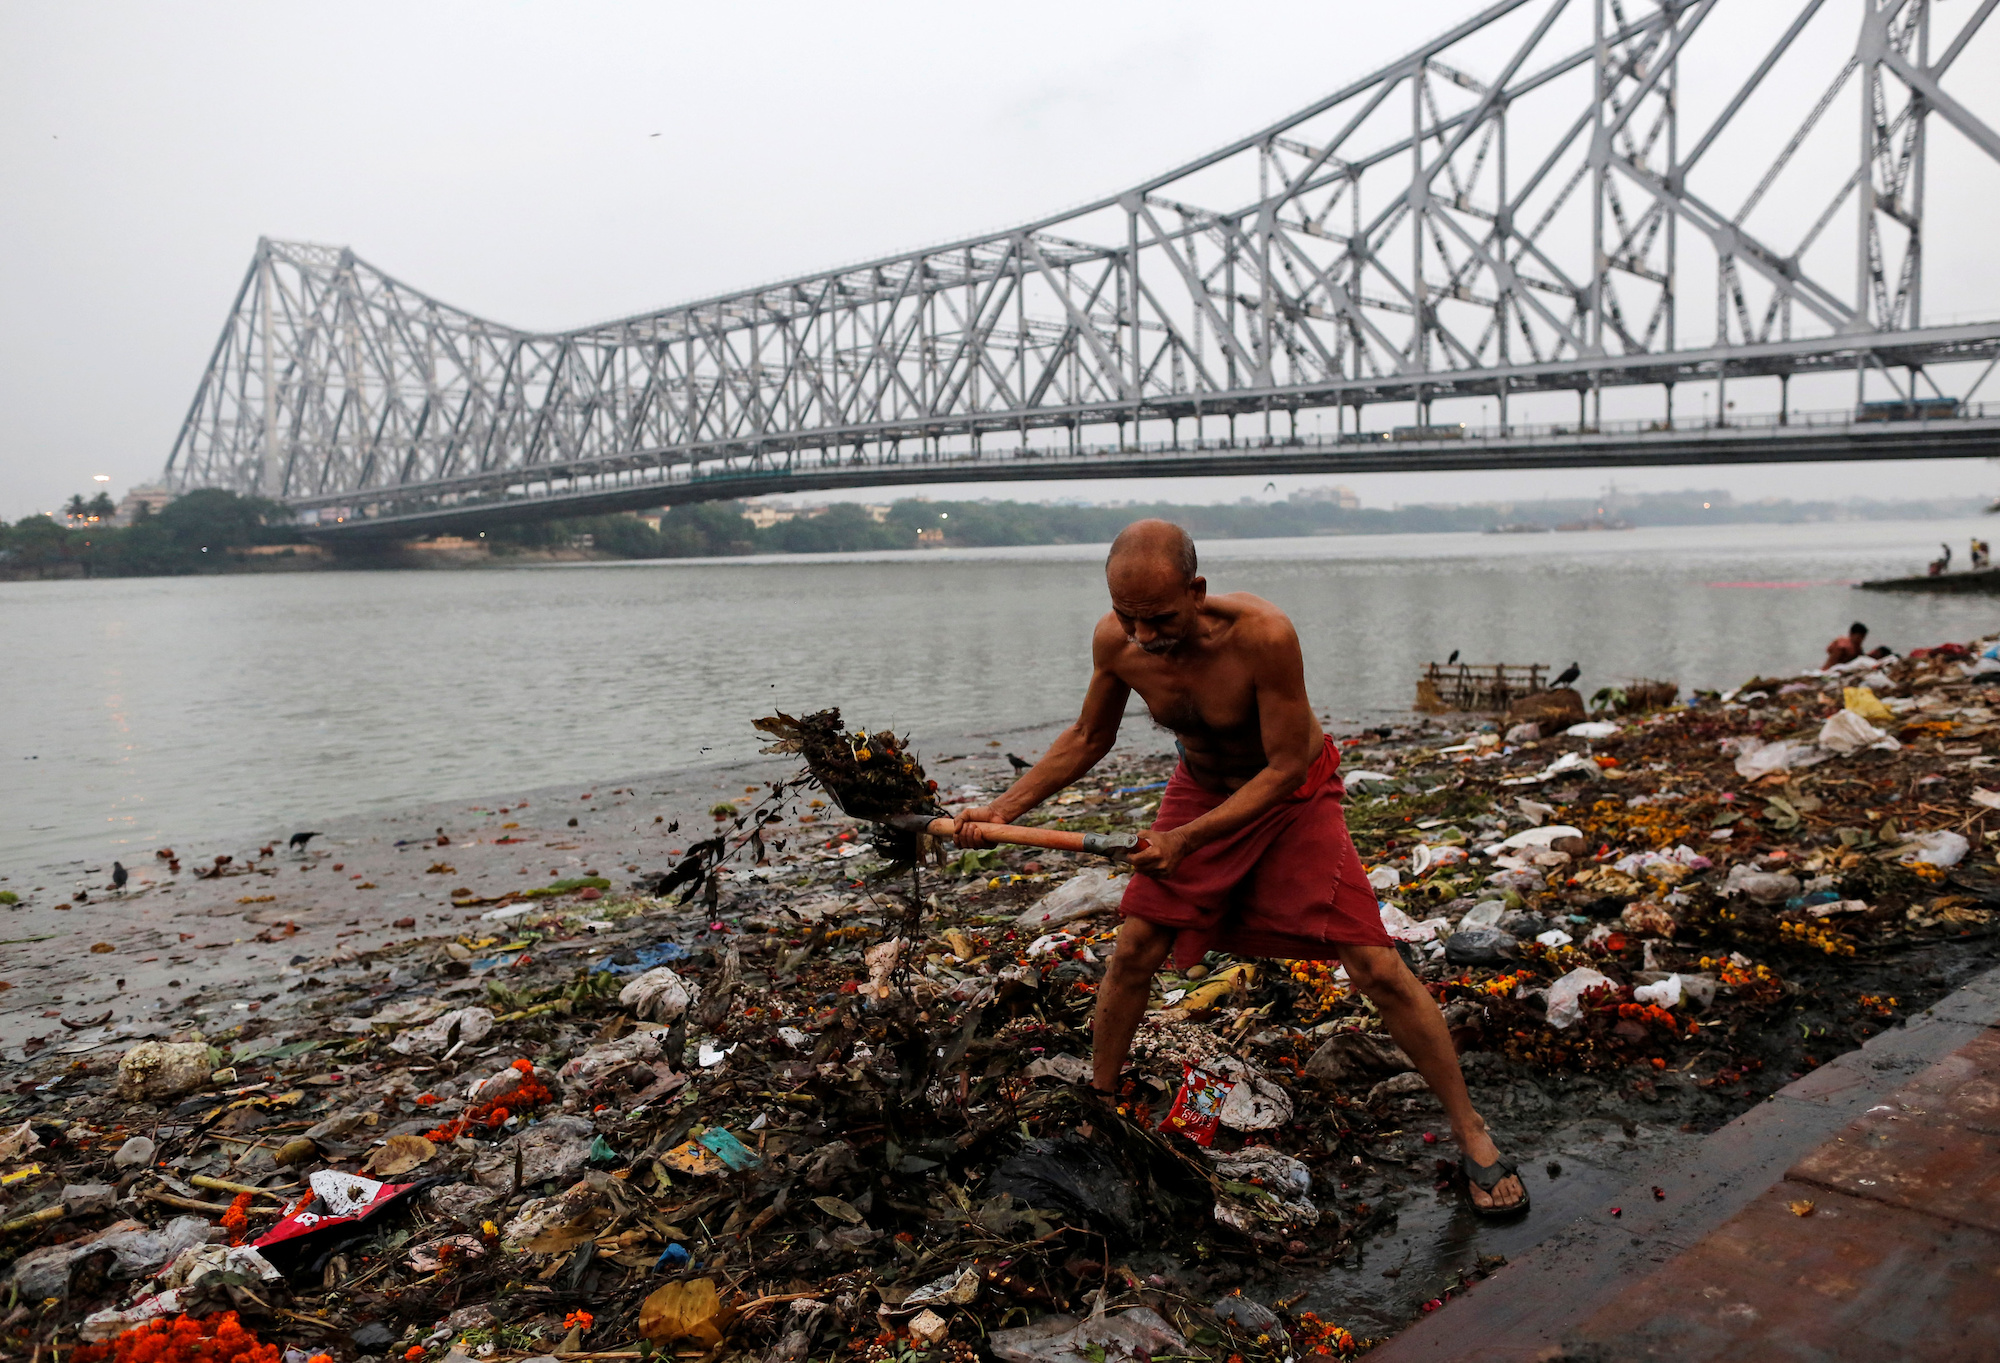 India's holy Ganges River is devastatingly polluted, yet provides